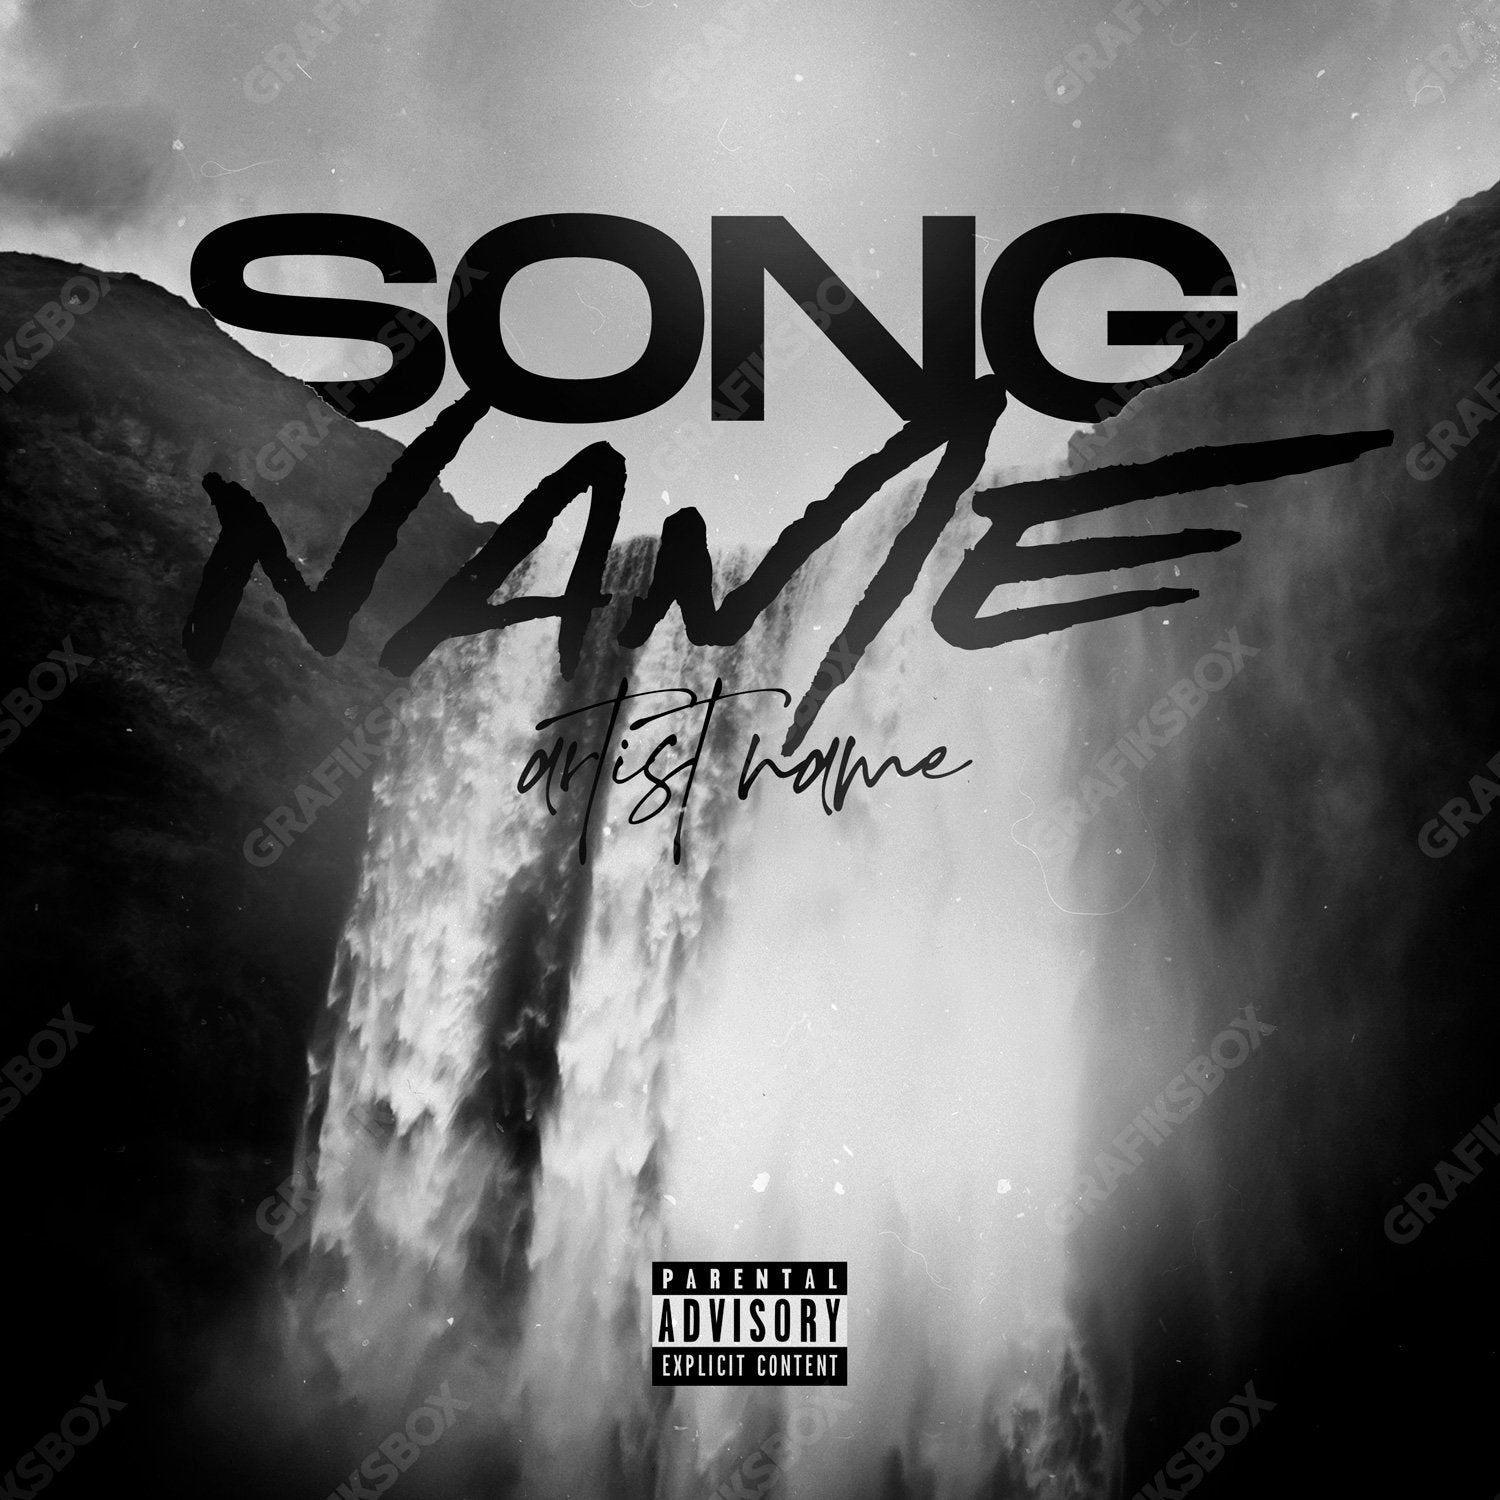 Waterfall premade cover art